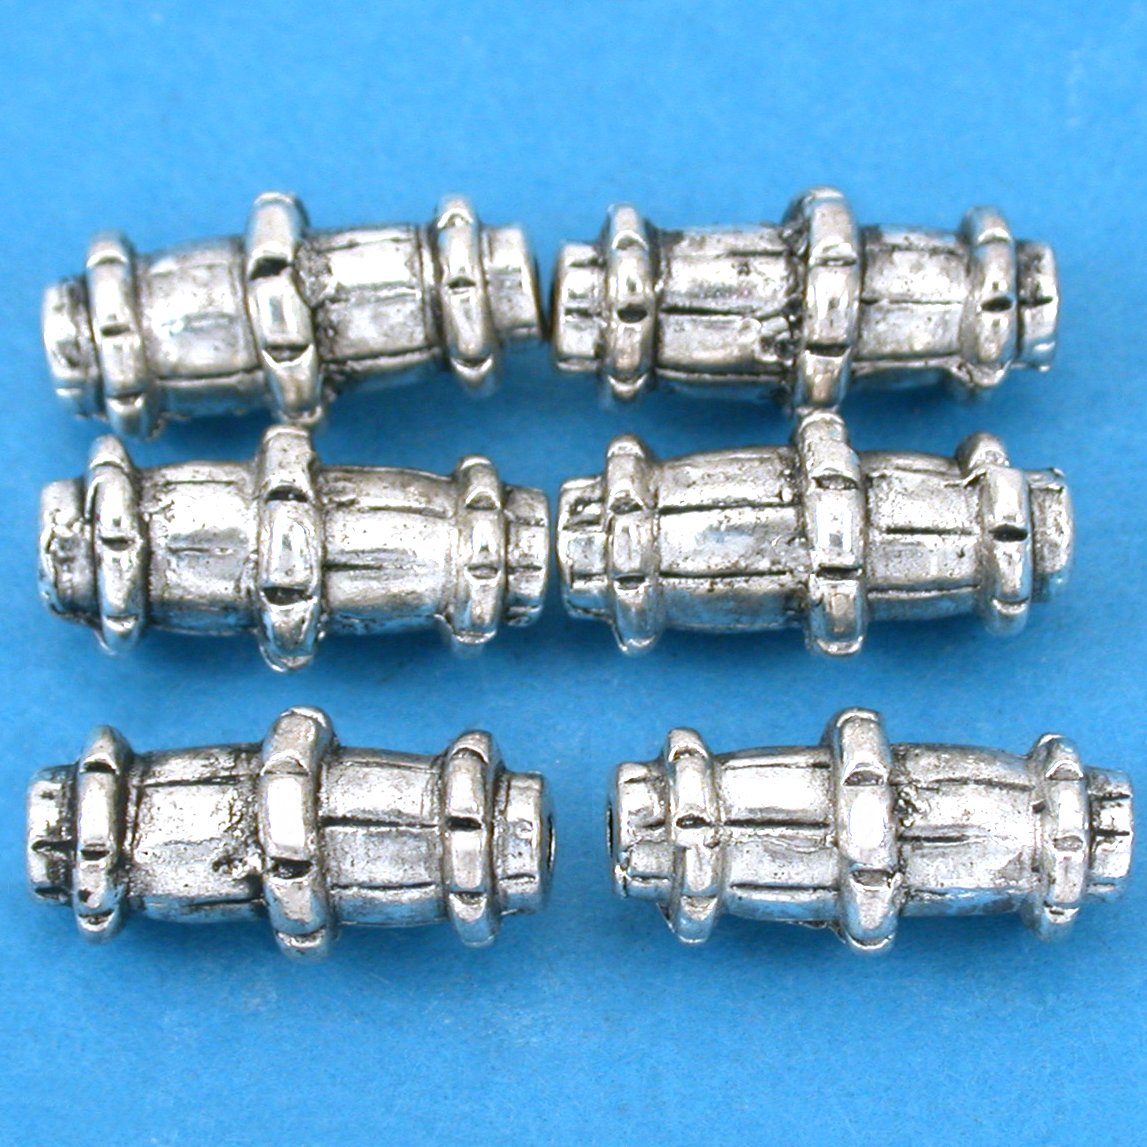 Bali Tube Antique Silver Plated Beads 17mm 15 Grams 6Pcs Approx.